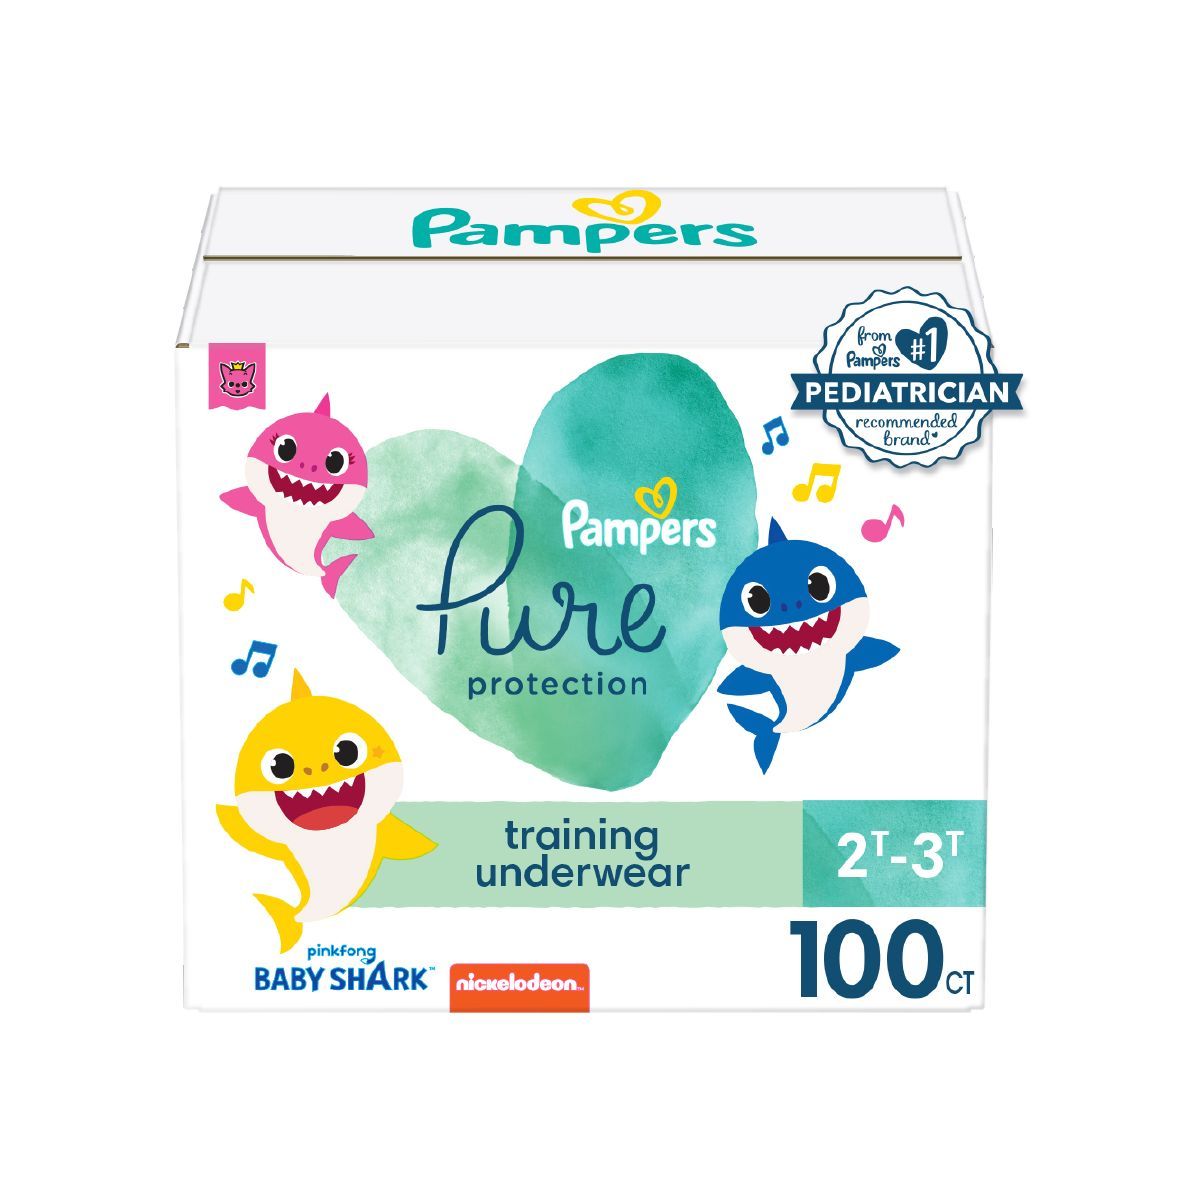 Pampers Pure Protection Training Underwear - Baby Shark - (Select Size and Count) | Target